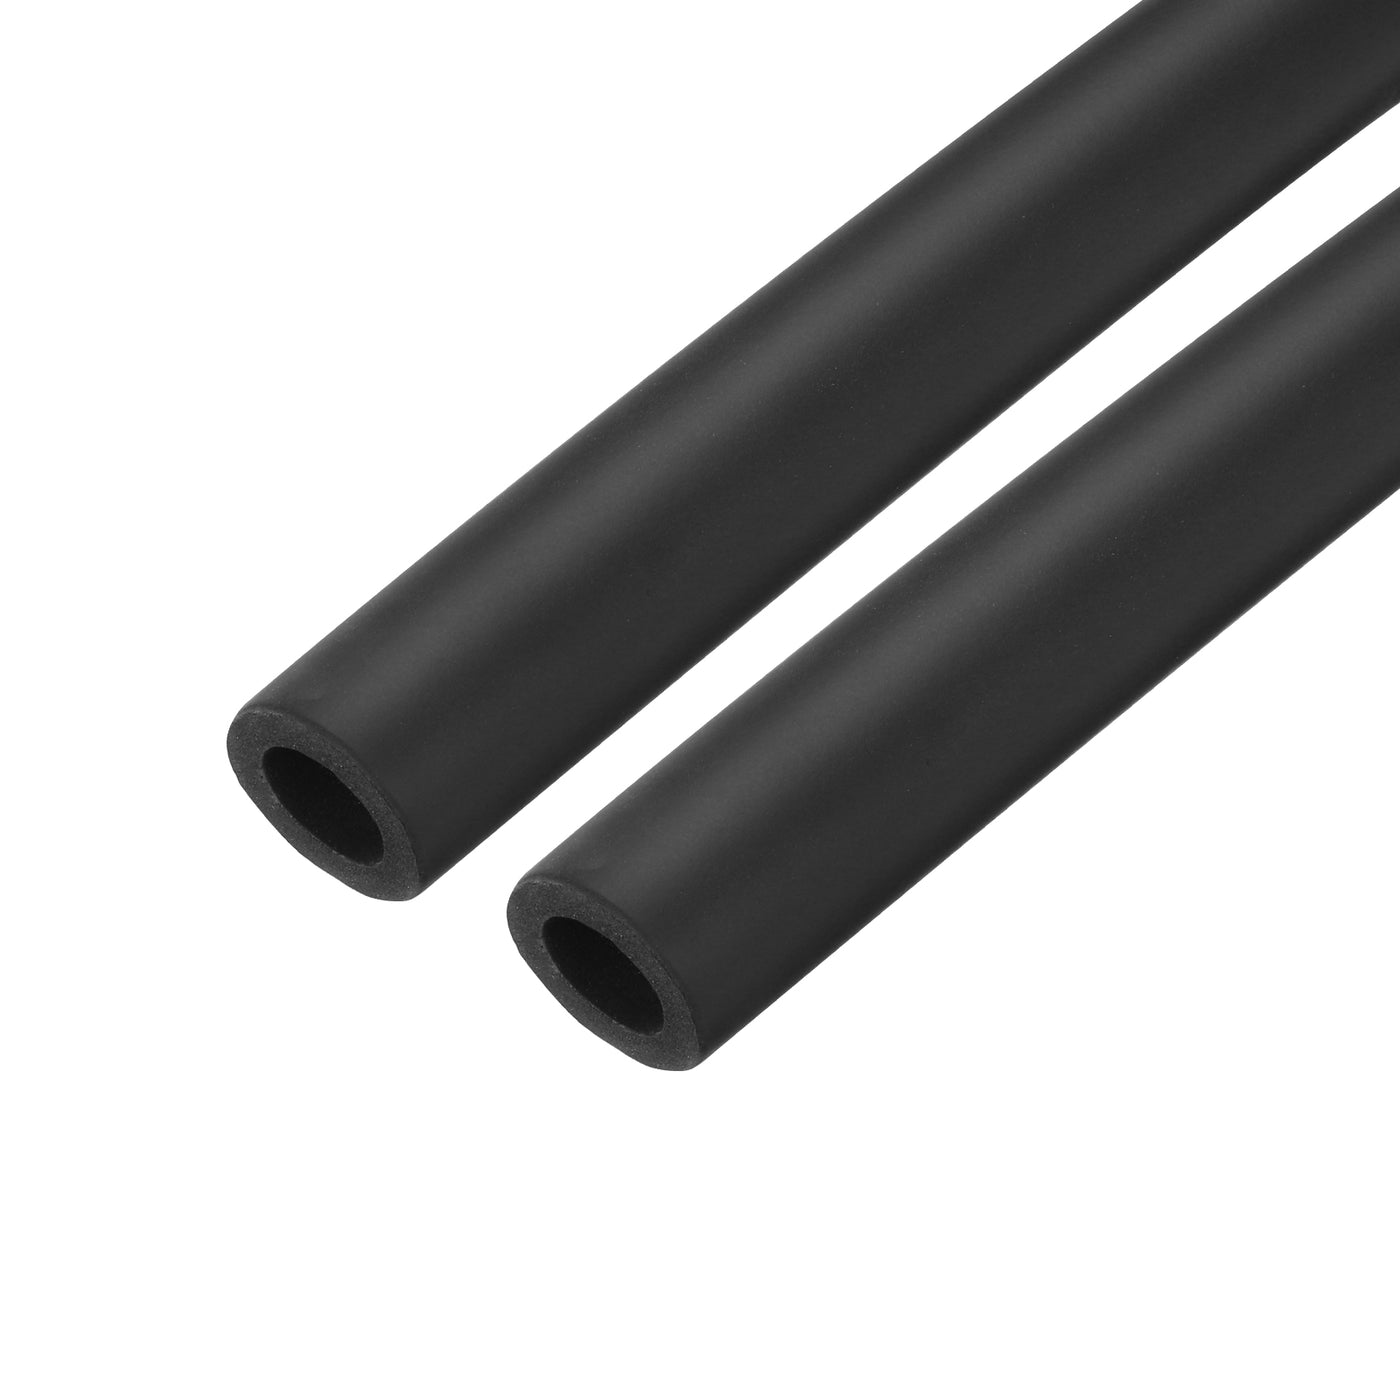 uxcell Uxcell 2pcs 3.3ft Pipe Insulation Tube 5/8 Inch(16mm) ID 26mm OD Foam Tubing for Handle Grip Support, Black